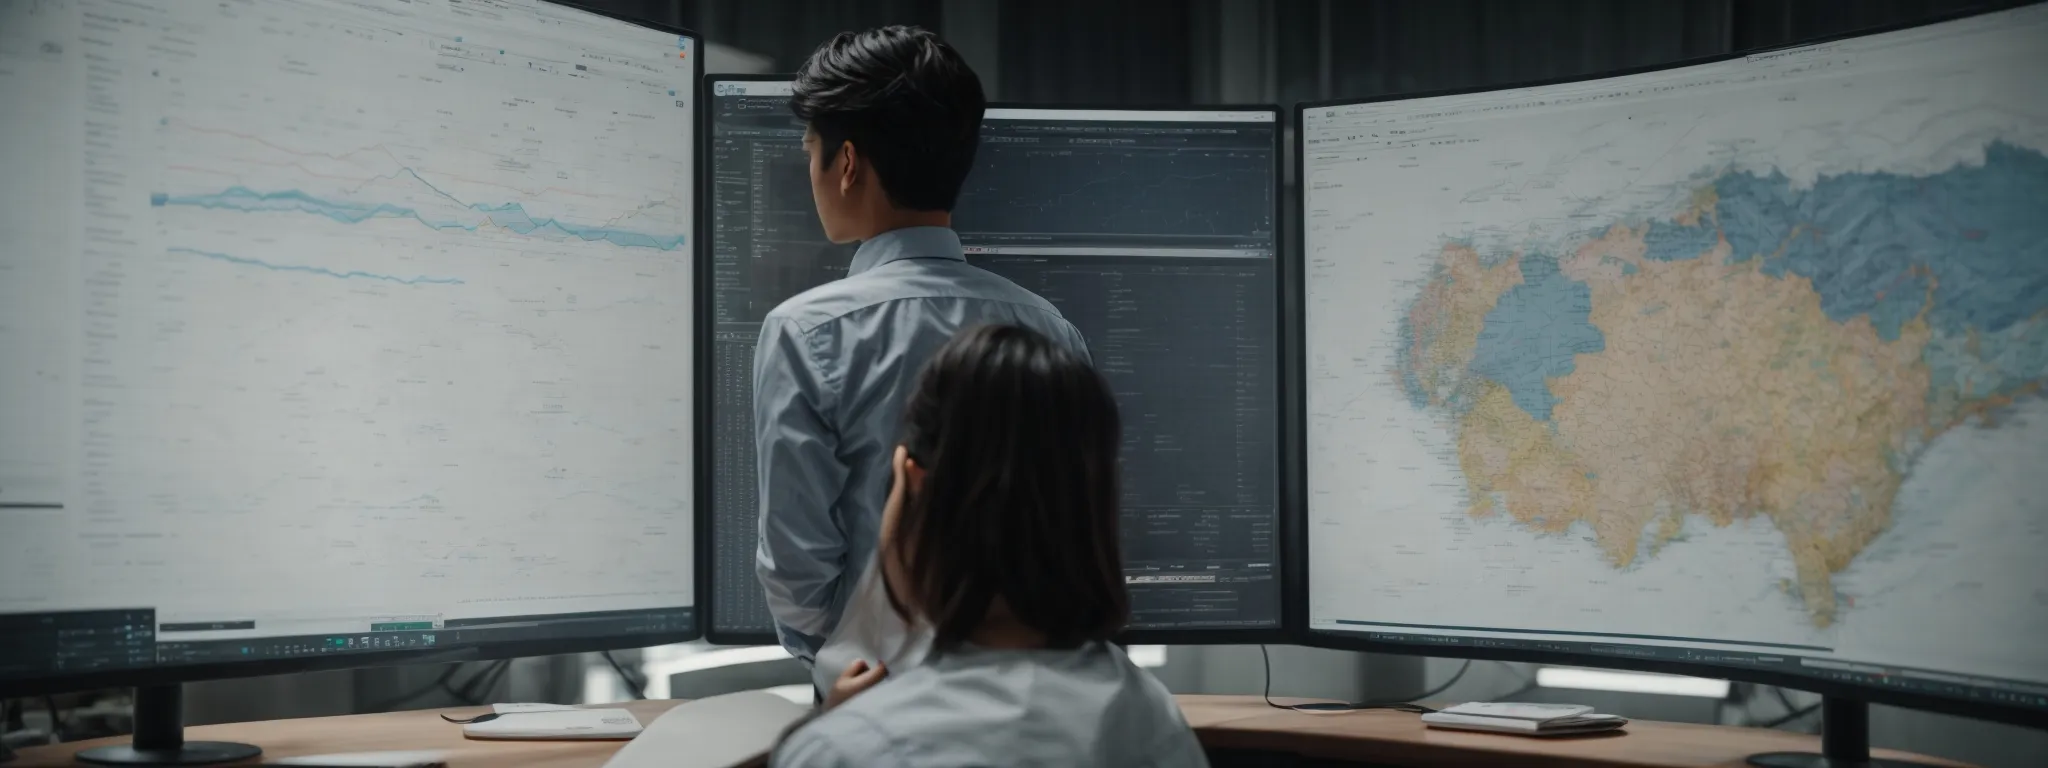 a person intently studying intricate graphs and charts on a large monitor that reflect website traffic and search engine rankings.